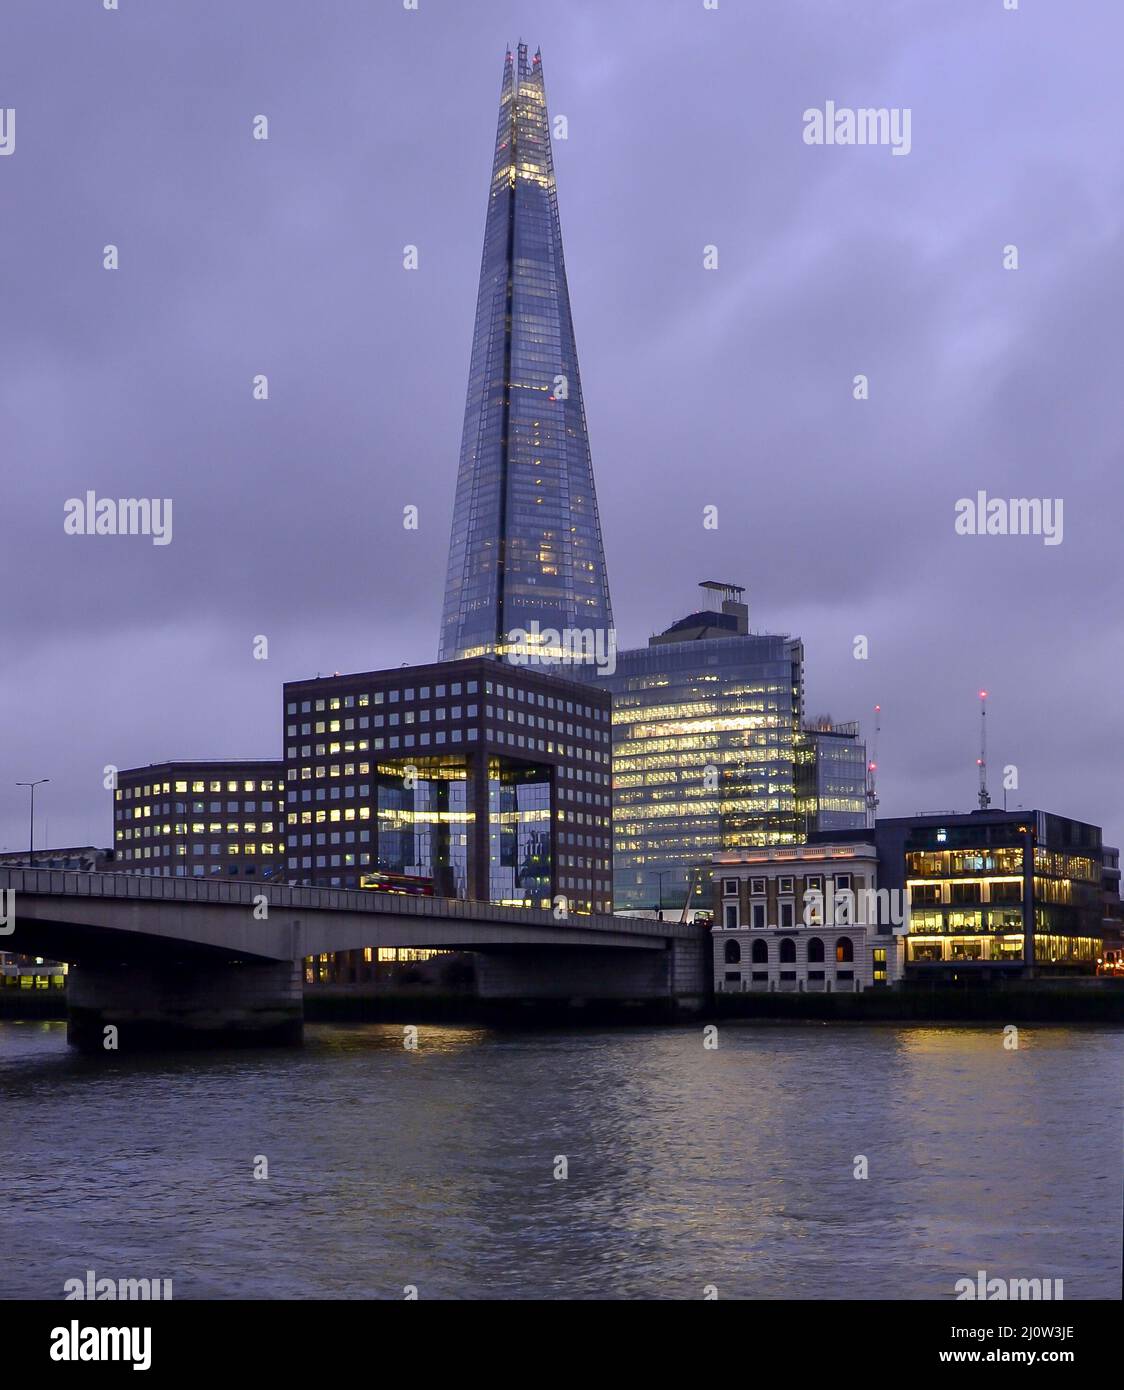 London , UK - February 14, 2015 : The Shard, the highest building in London.. Stock Photo